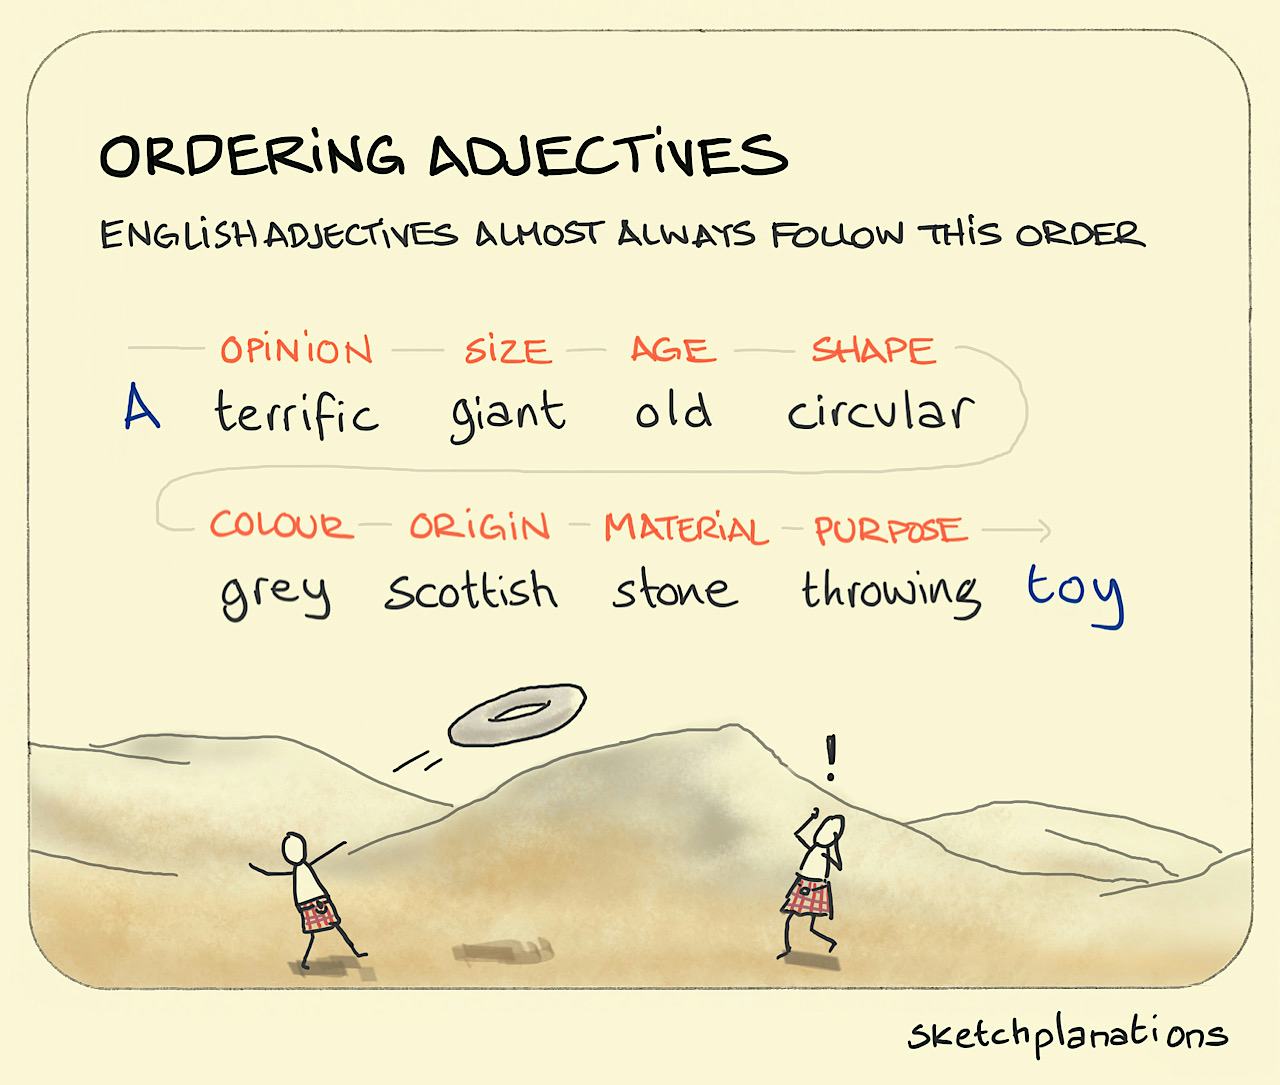 Ordering adjectives illustration: two people in kilts improbably play catch with a terrific giant old circular grey scottish stone throwing toy